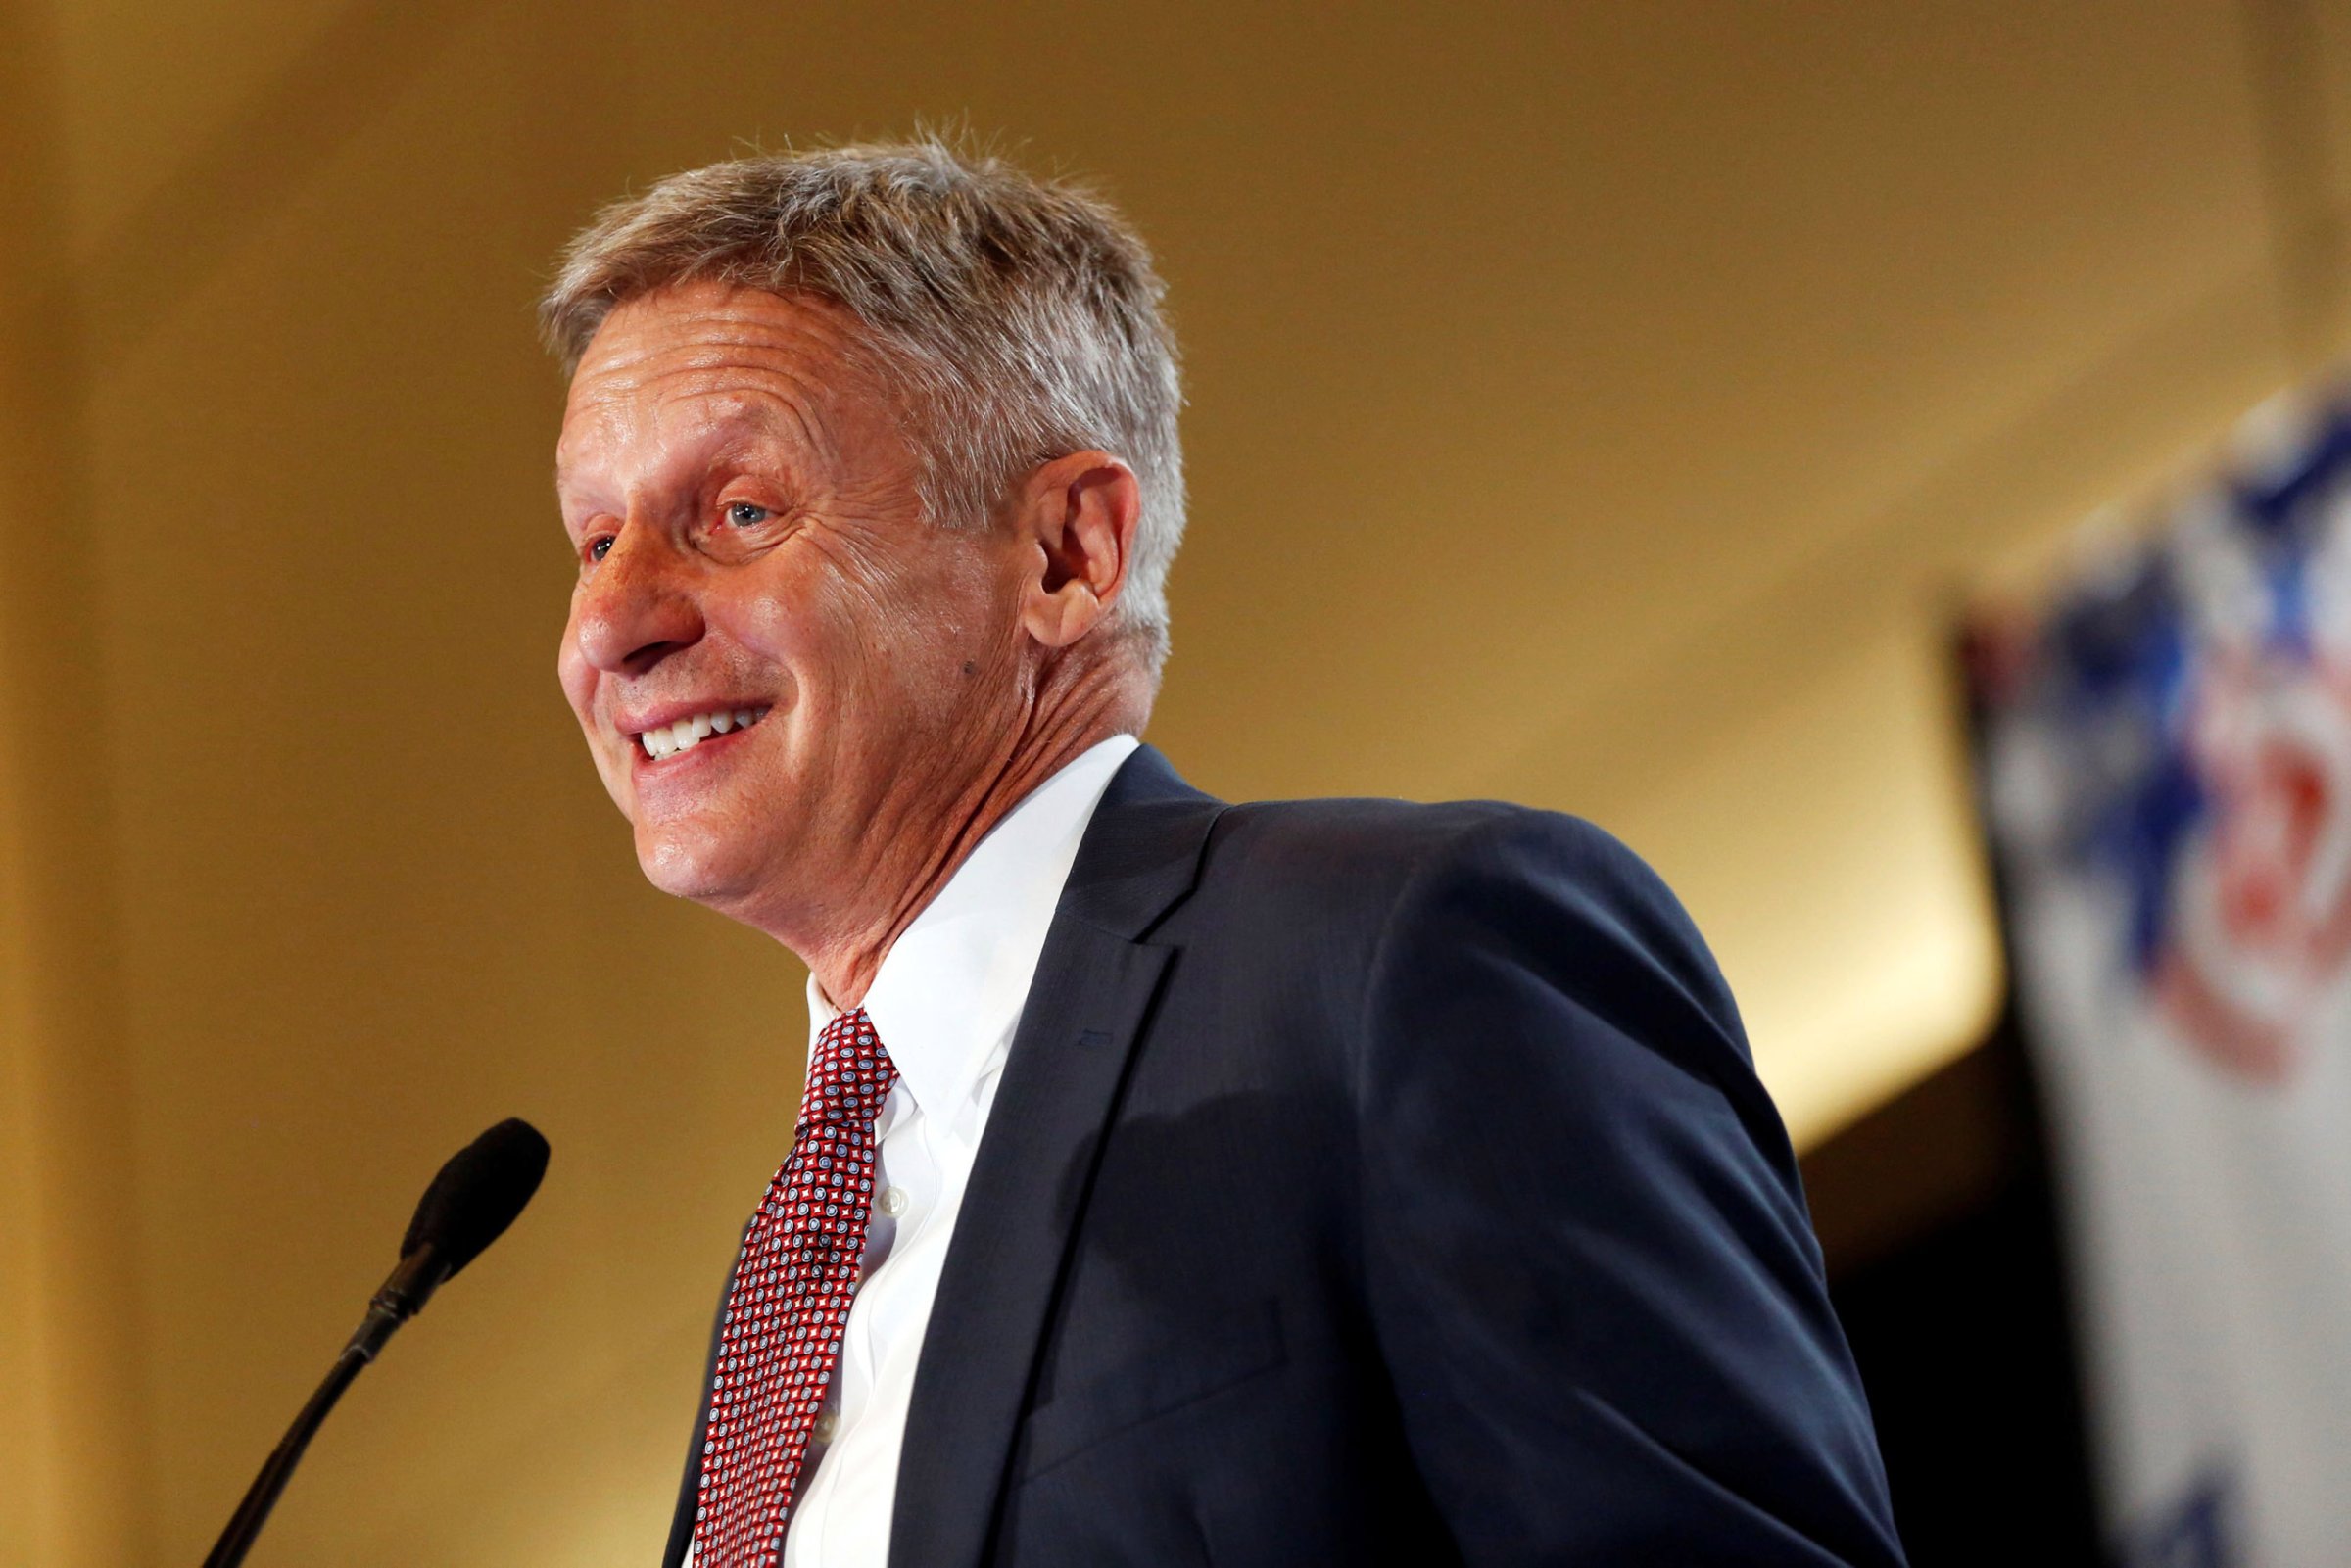 Libertarian Party presidential candidate Gary Johnson speaks during the "Politicon" convention in Pasadena, California, U.S. June 25, 2016.